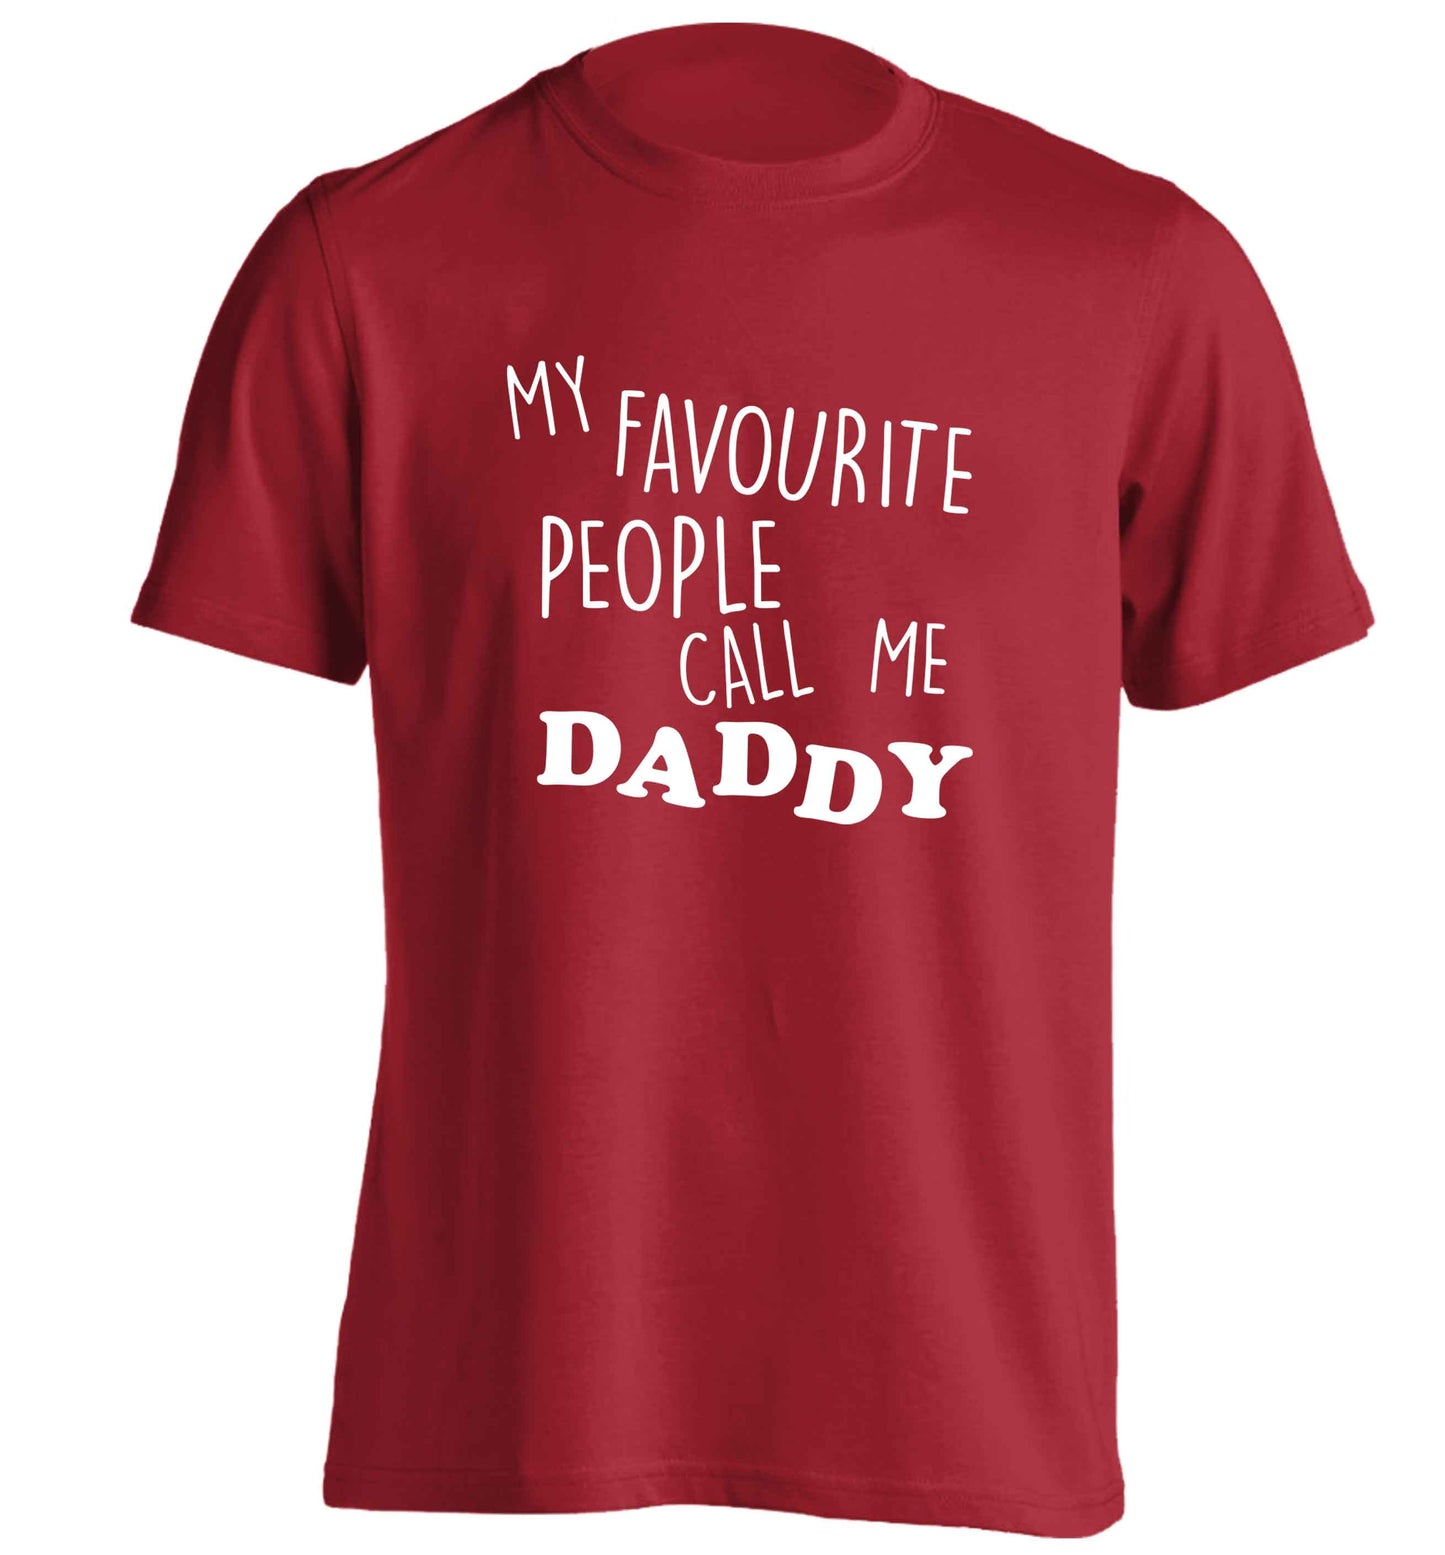 My favourite people call me daddy adults unisex red Tshirt 2XL